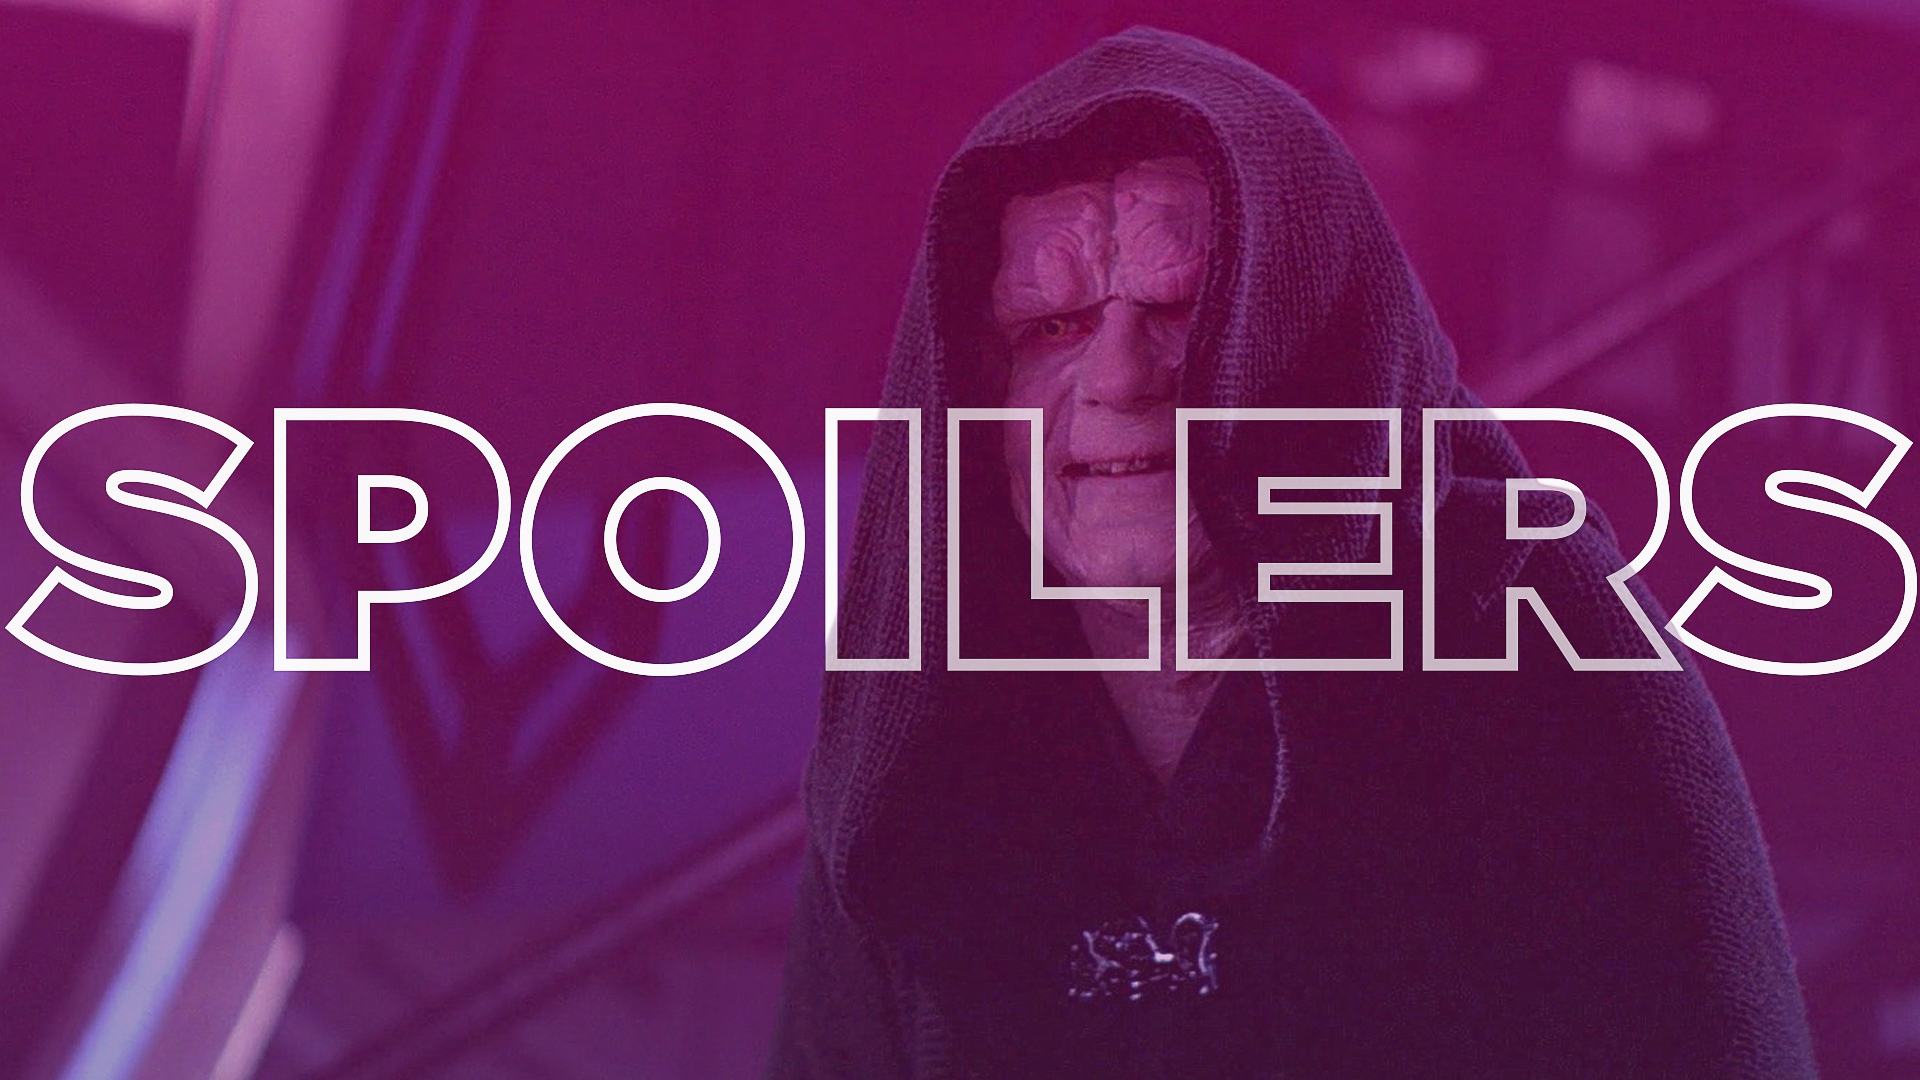 Emperor Palpatine from Star Wars with the words “spoilers” superimposed over the center of the image